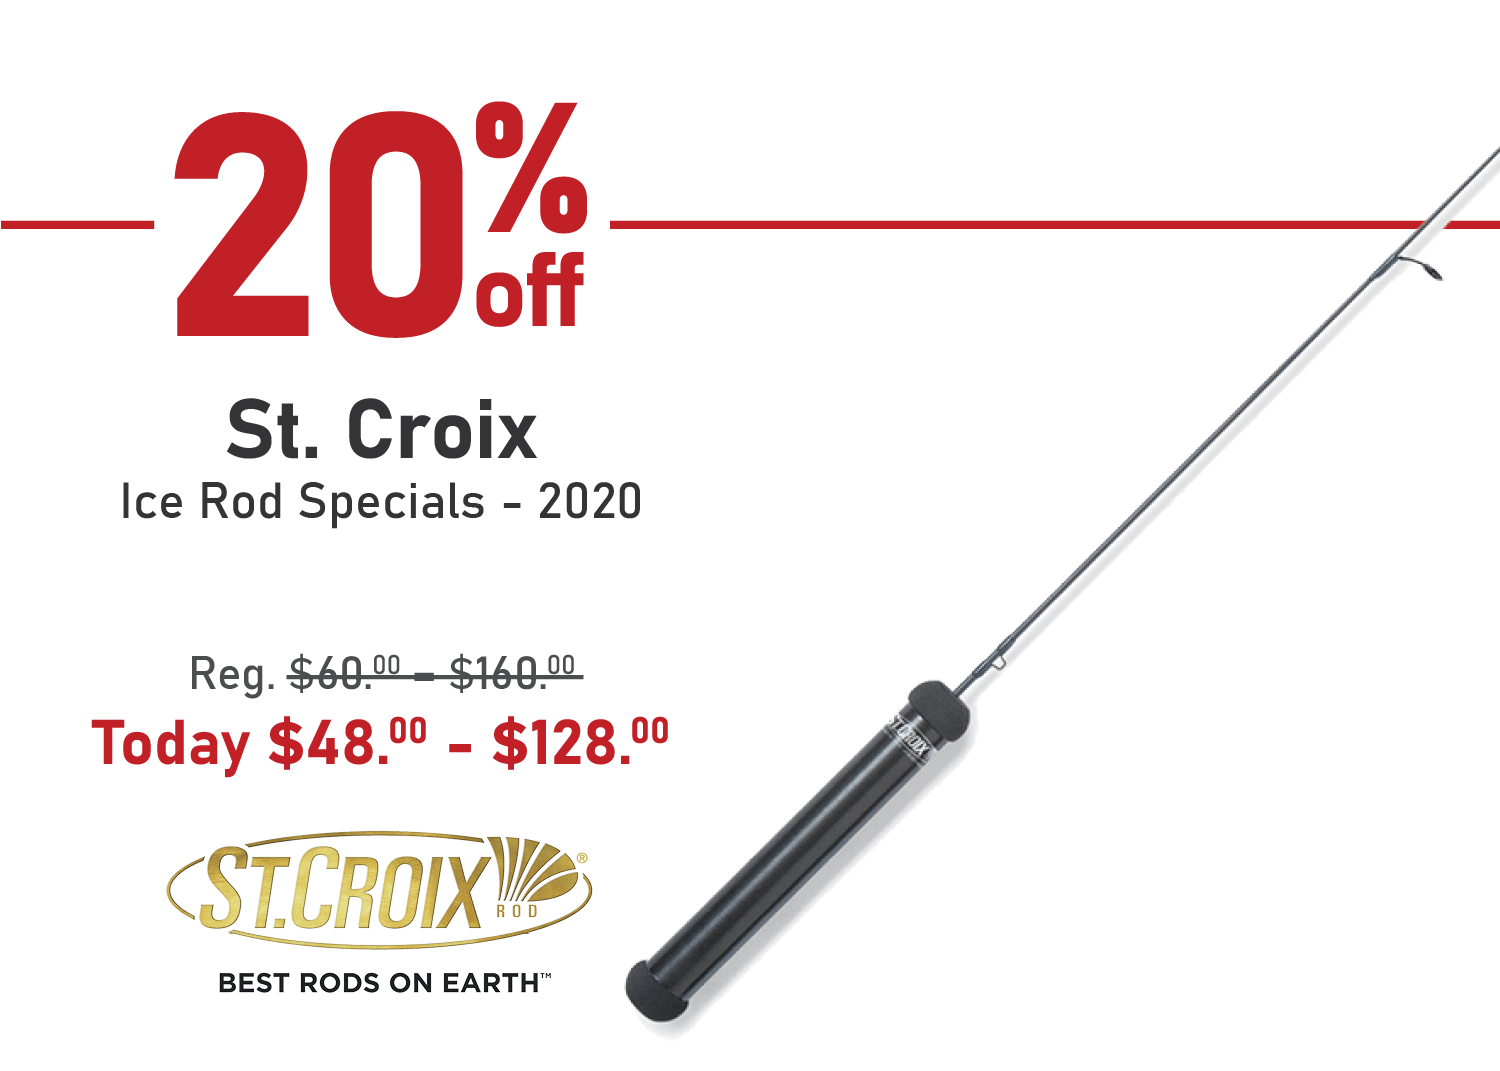 Save 20% on the St. Croix Ice Rod Specials - 2020